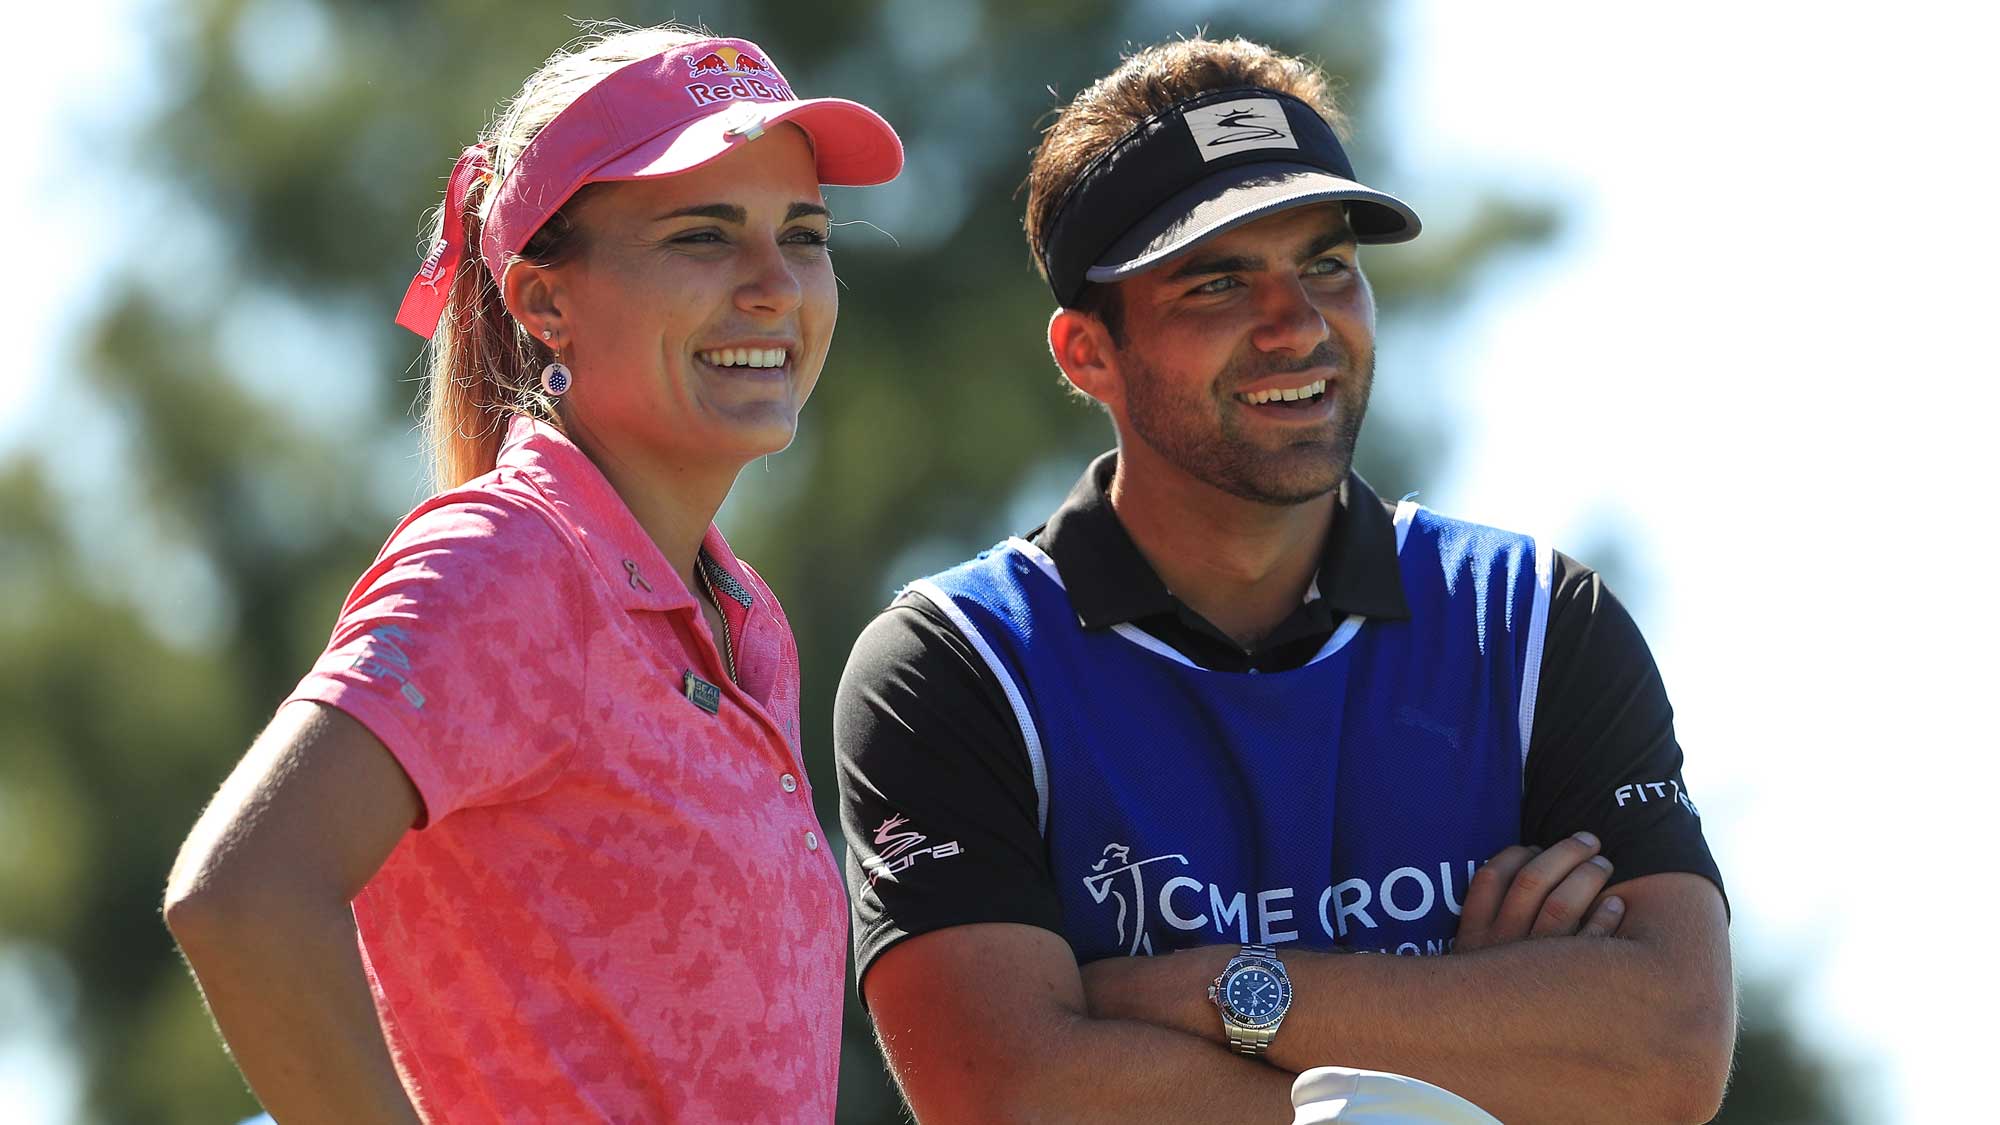 Lexi Thompson talks with her brother and caddie, Curtis, on the fourth tee during the third round of the LPGA CME Group Tour Championship